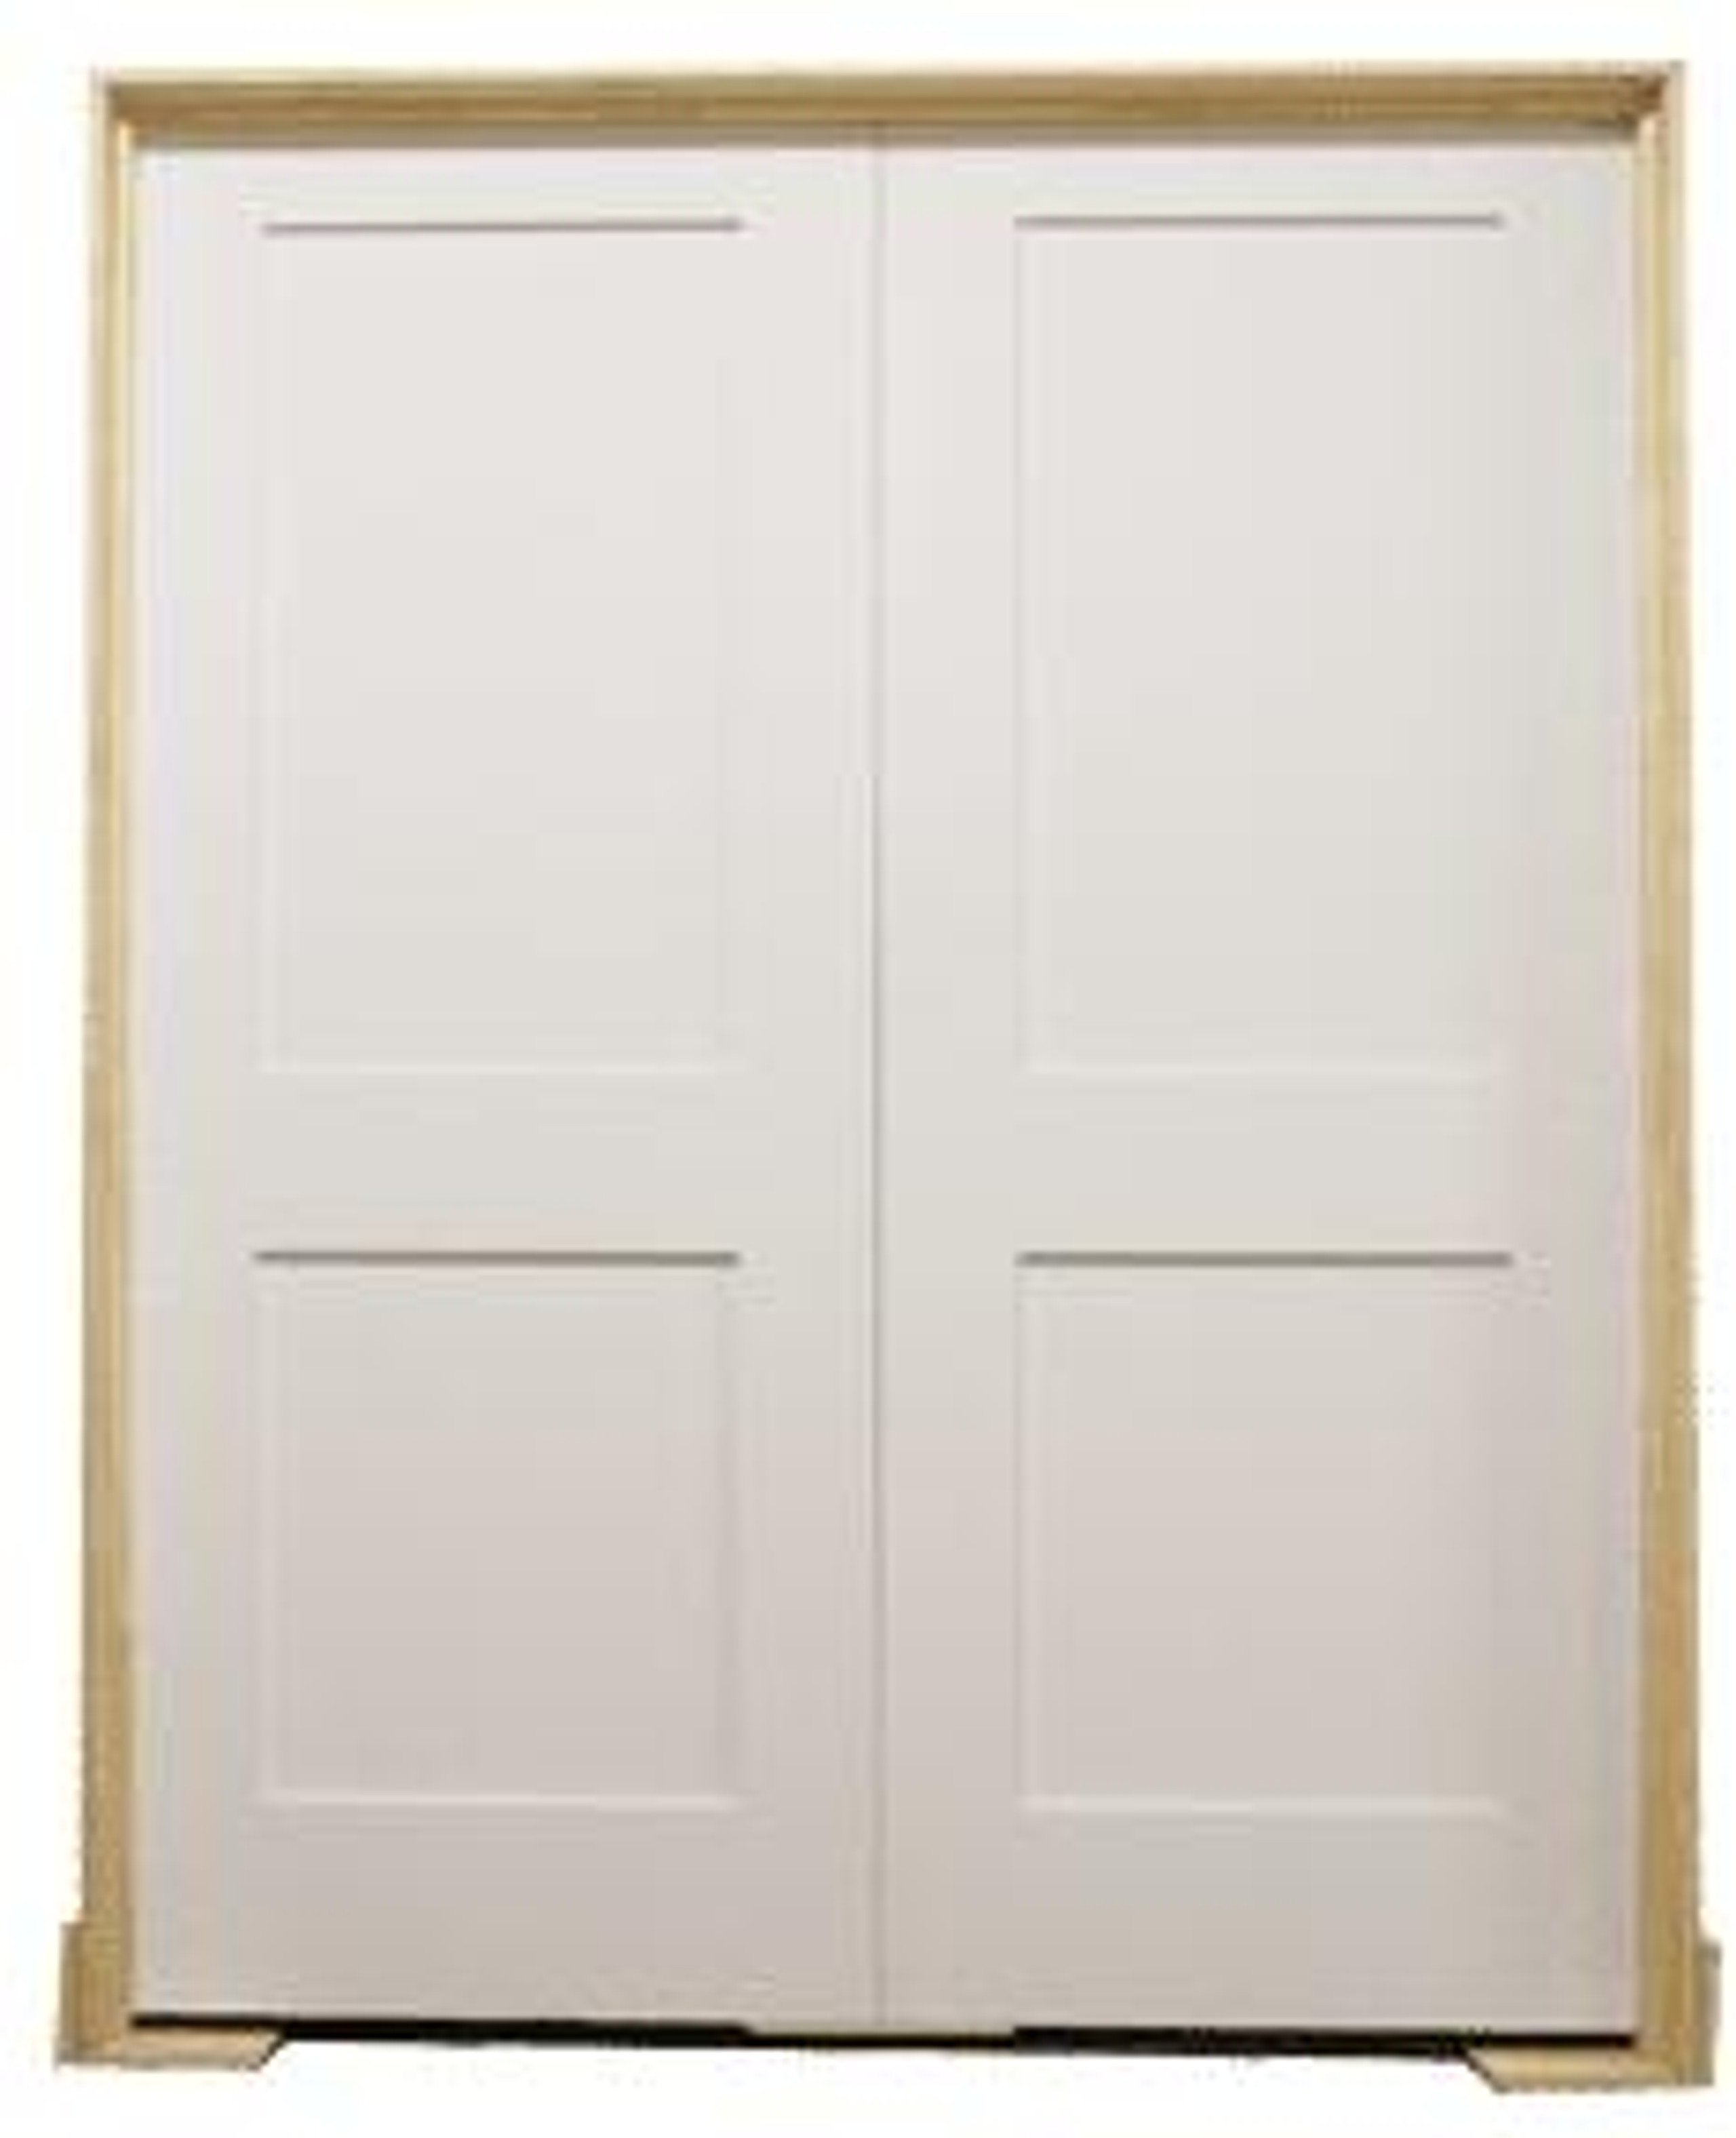 60 In X 80 In White Shaker 2 Panel Solid Core Primed Mdf Prehung Interior French Door  70817.1620920888 ?c=2